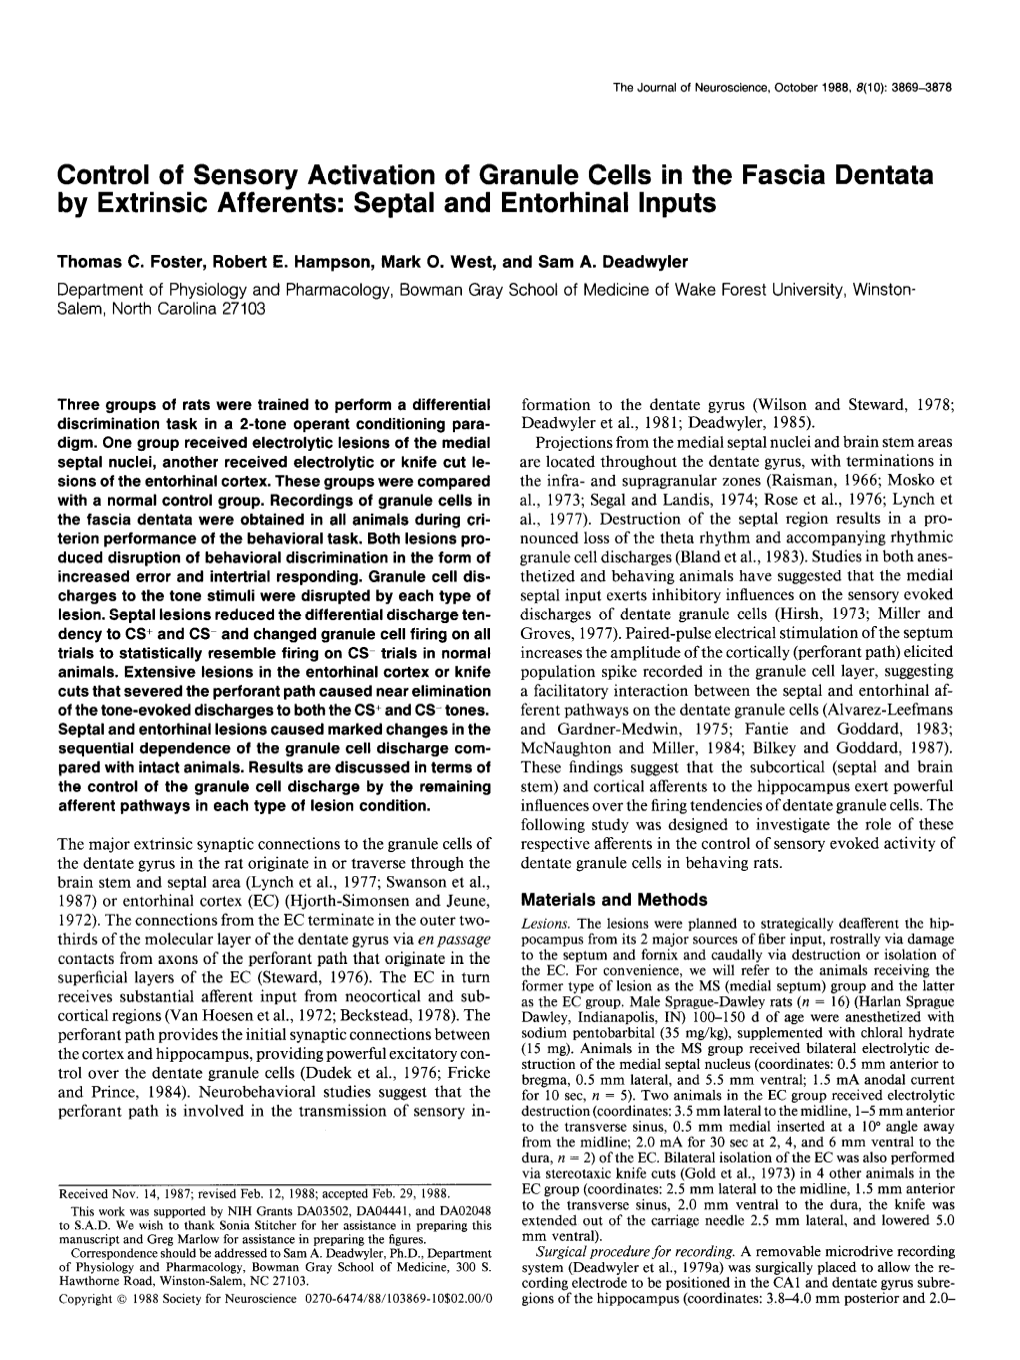 Control of Sensory Activation of Granule Cells in the Fascia Dentata by Extrinsic Afferents: Septal and Entorhinal Inputs